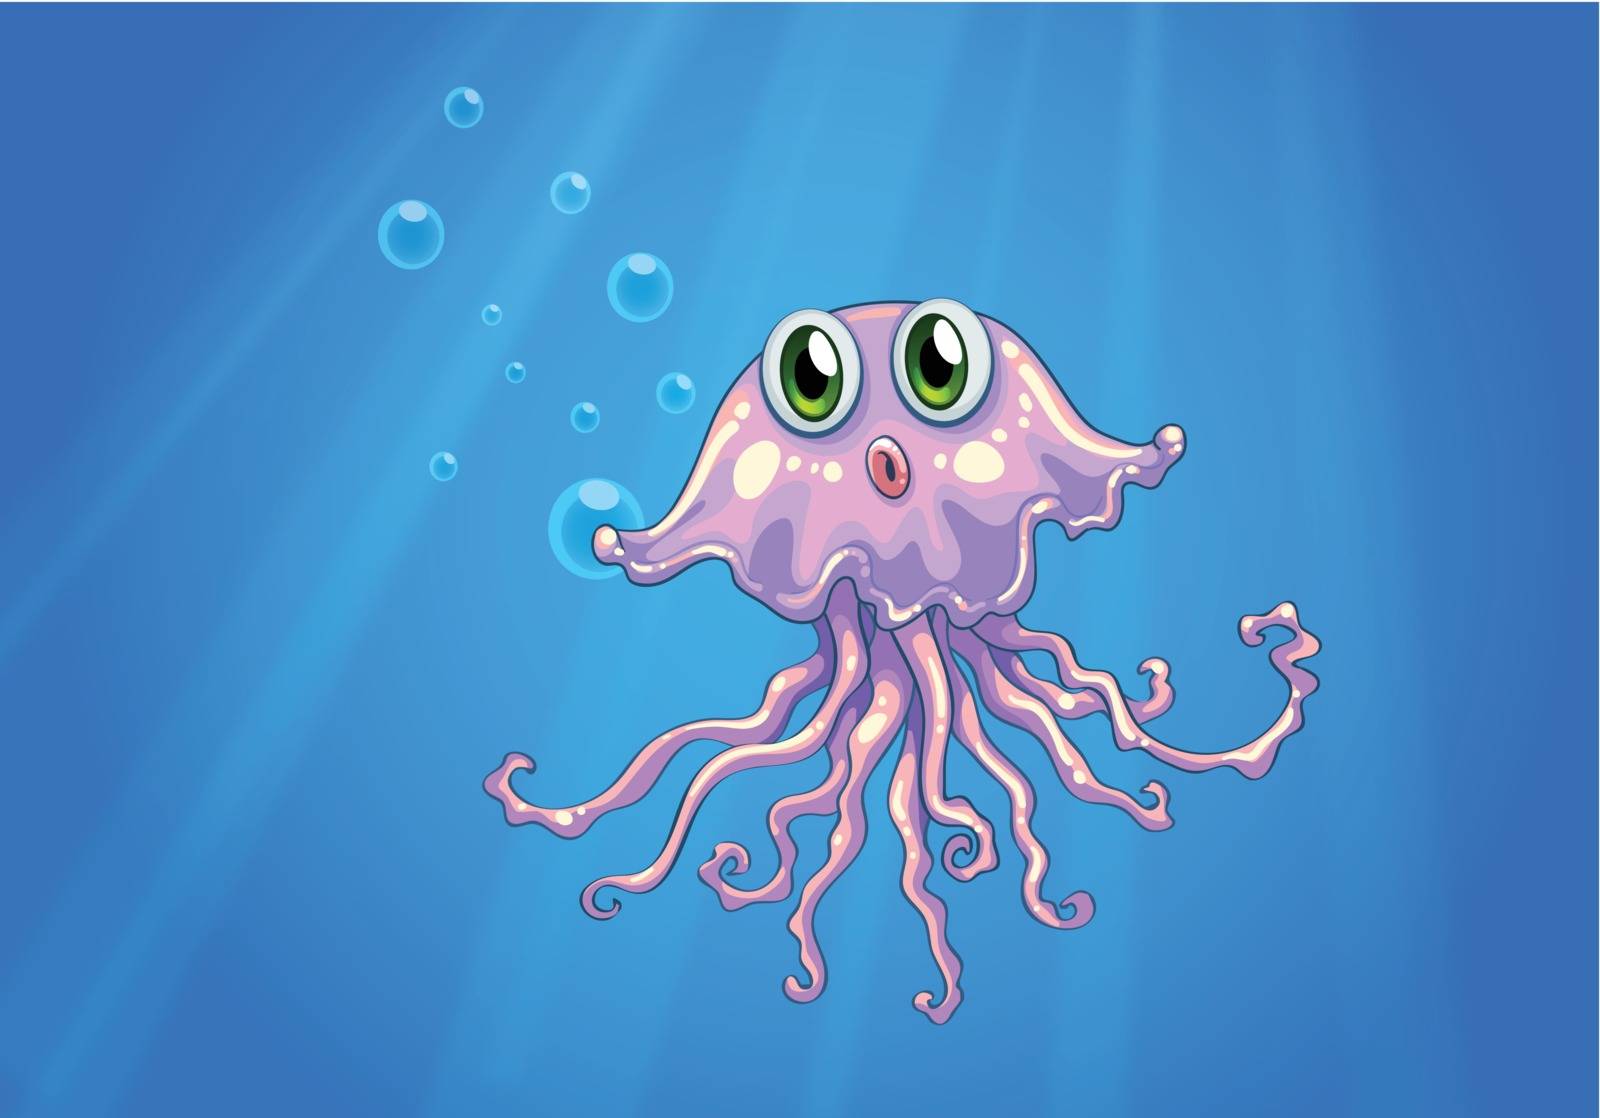 Illustration of an octopus under the sea